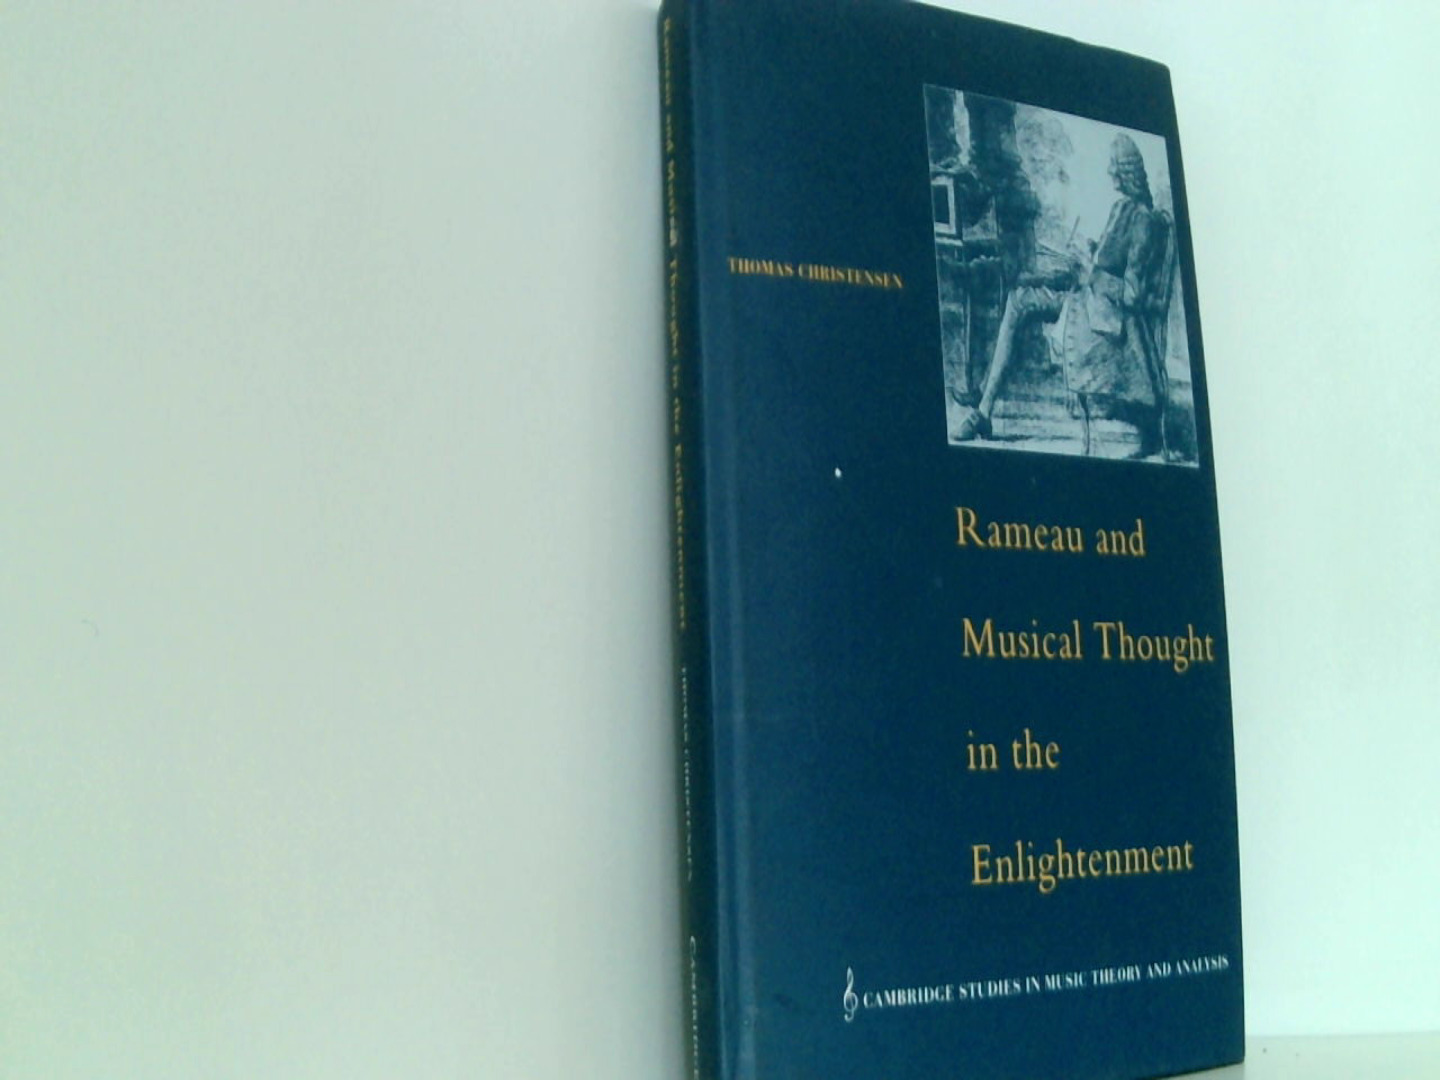 Rameau and Musical Thought in the Enlightenment (Cambridge Studies in Music Theory and Analysis, Band 4) - Christensen, Thomas und Ian Bent